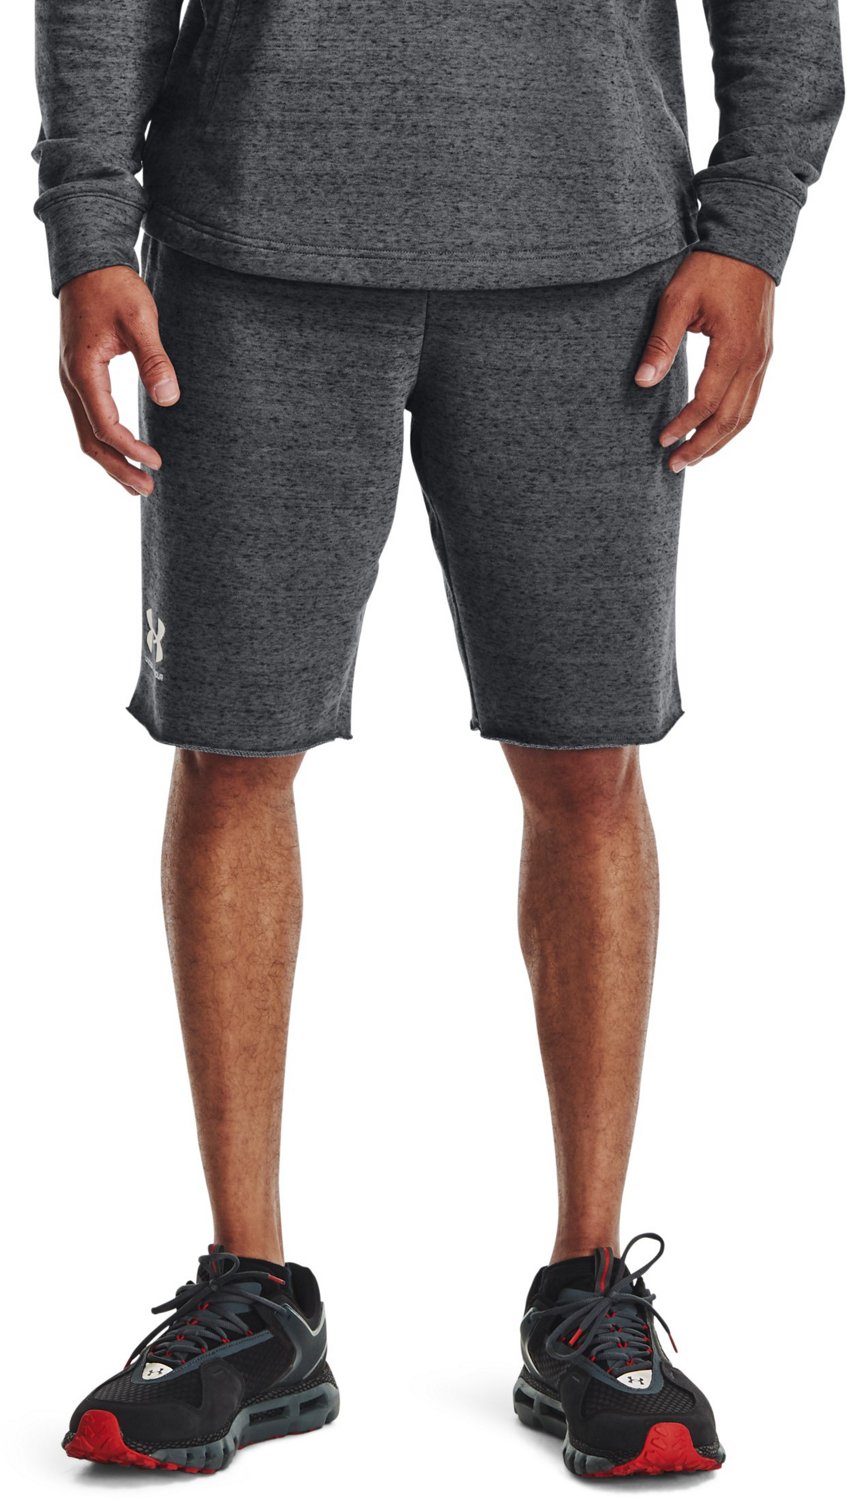 Under Armour Mens Rival Terry Shorts 10 in.